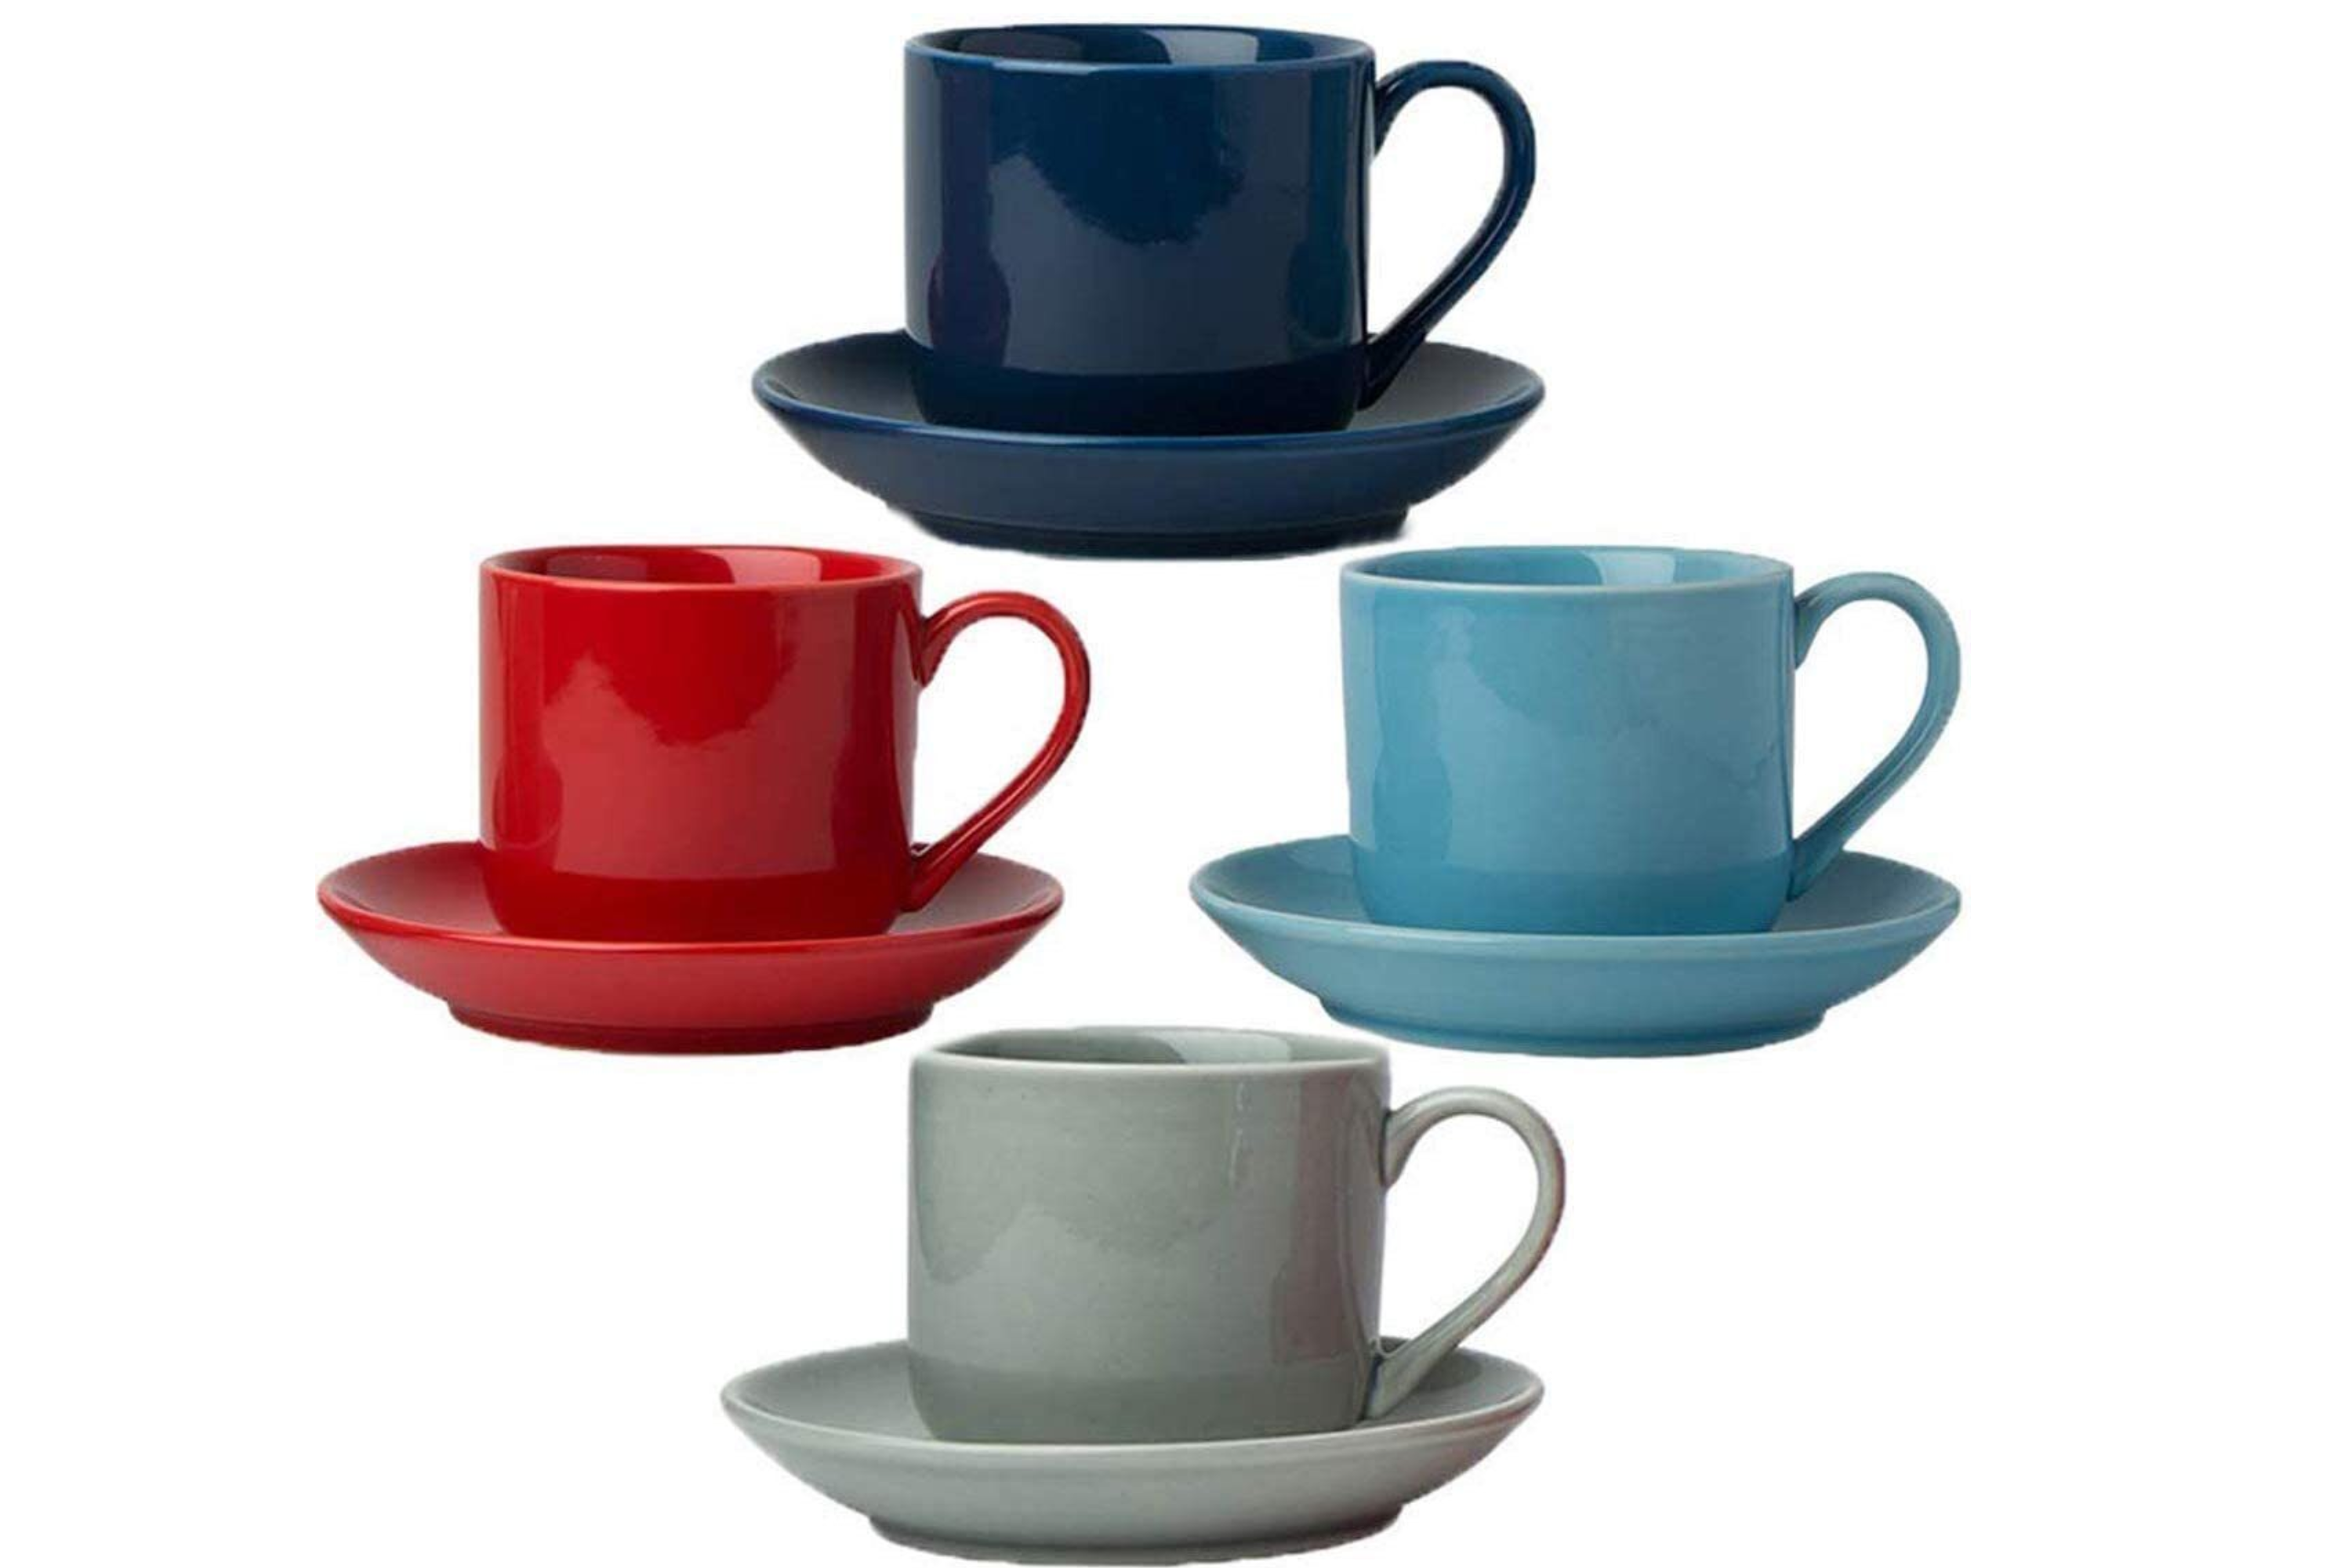 4oz. Espresso Cups Set of 4 With Matching Saucers– Comfify